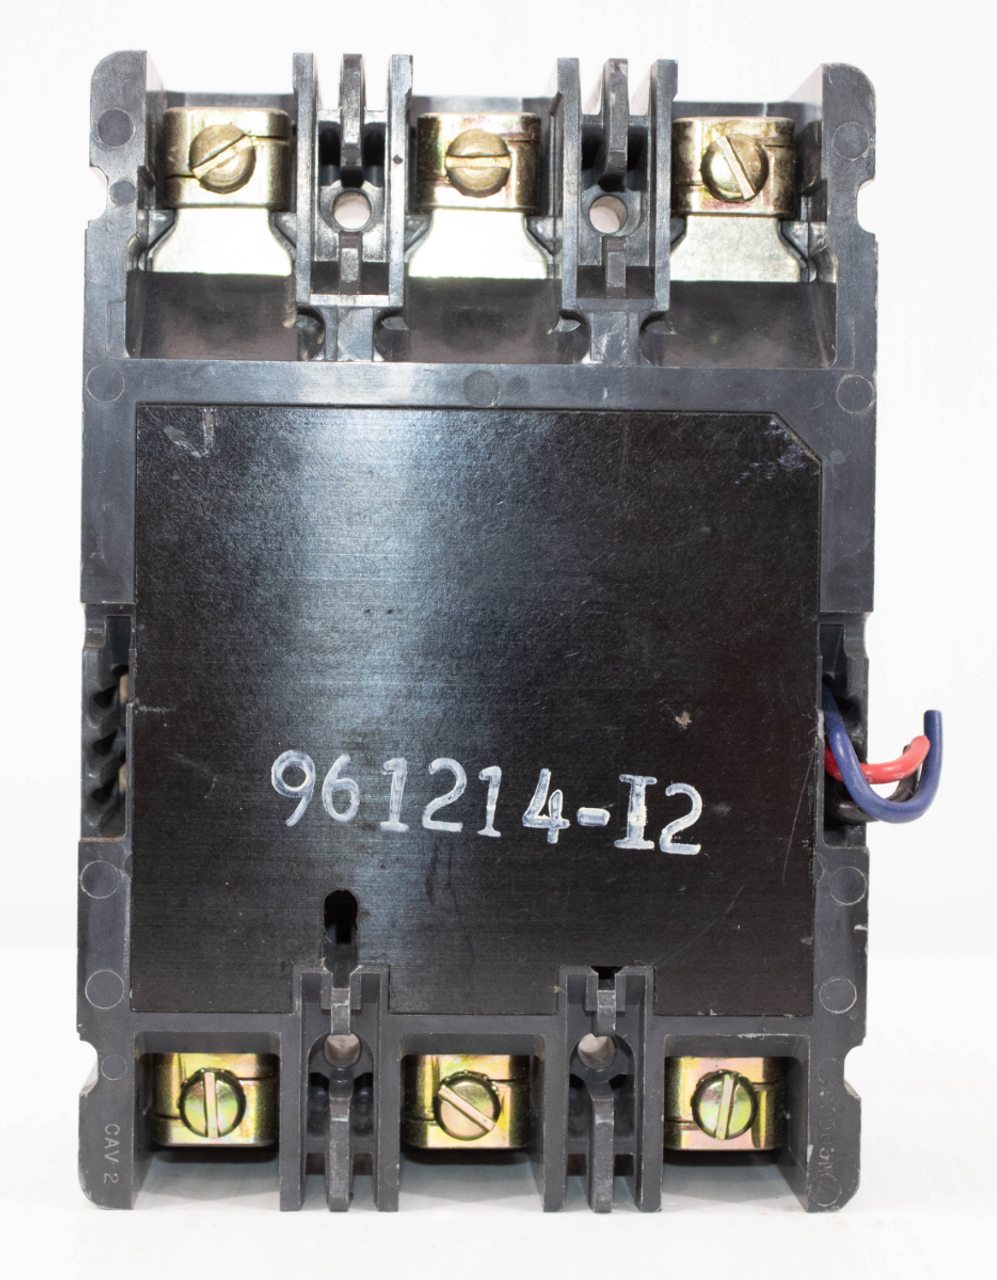 Cutler Hammer FDB3015 Breaker 15A 600V 3P 14KA Thermal Magnetic Long-Time and Instantaneous